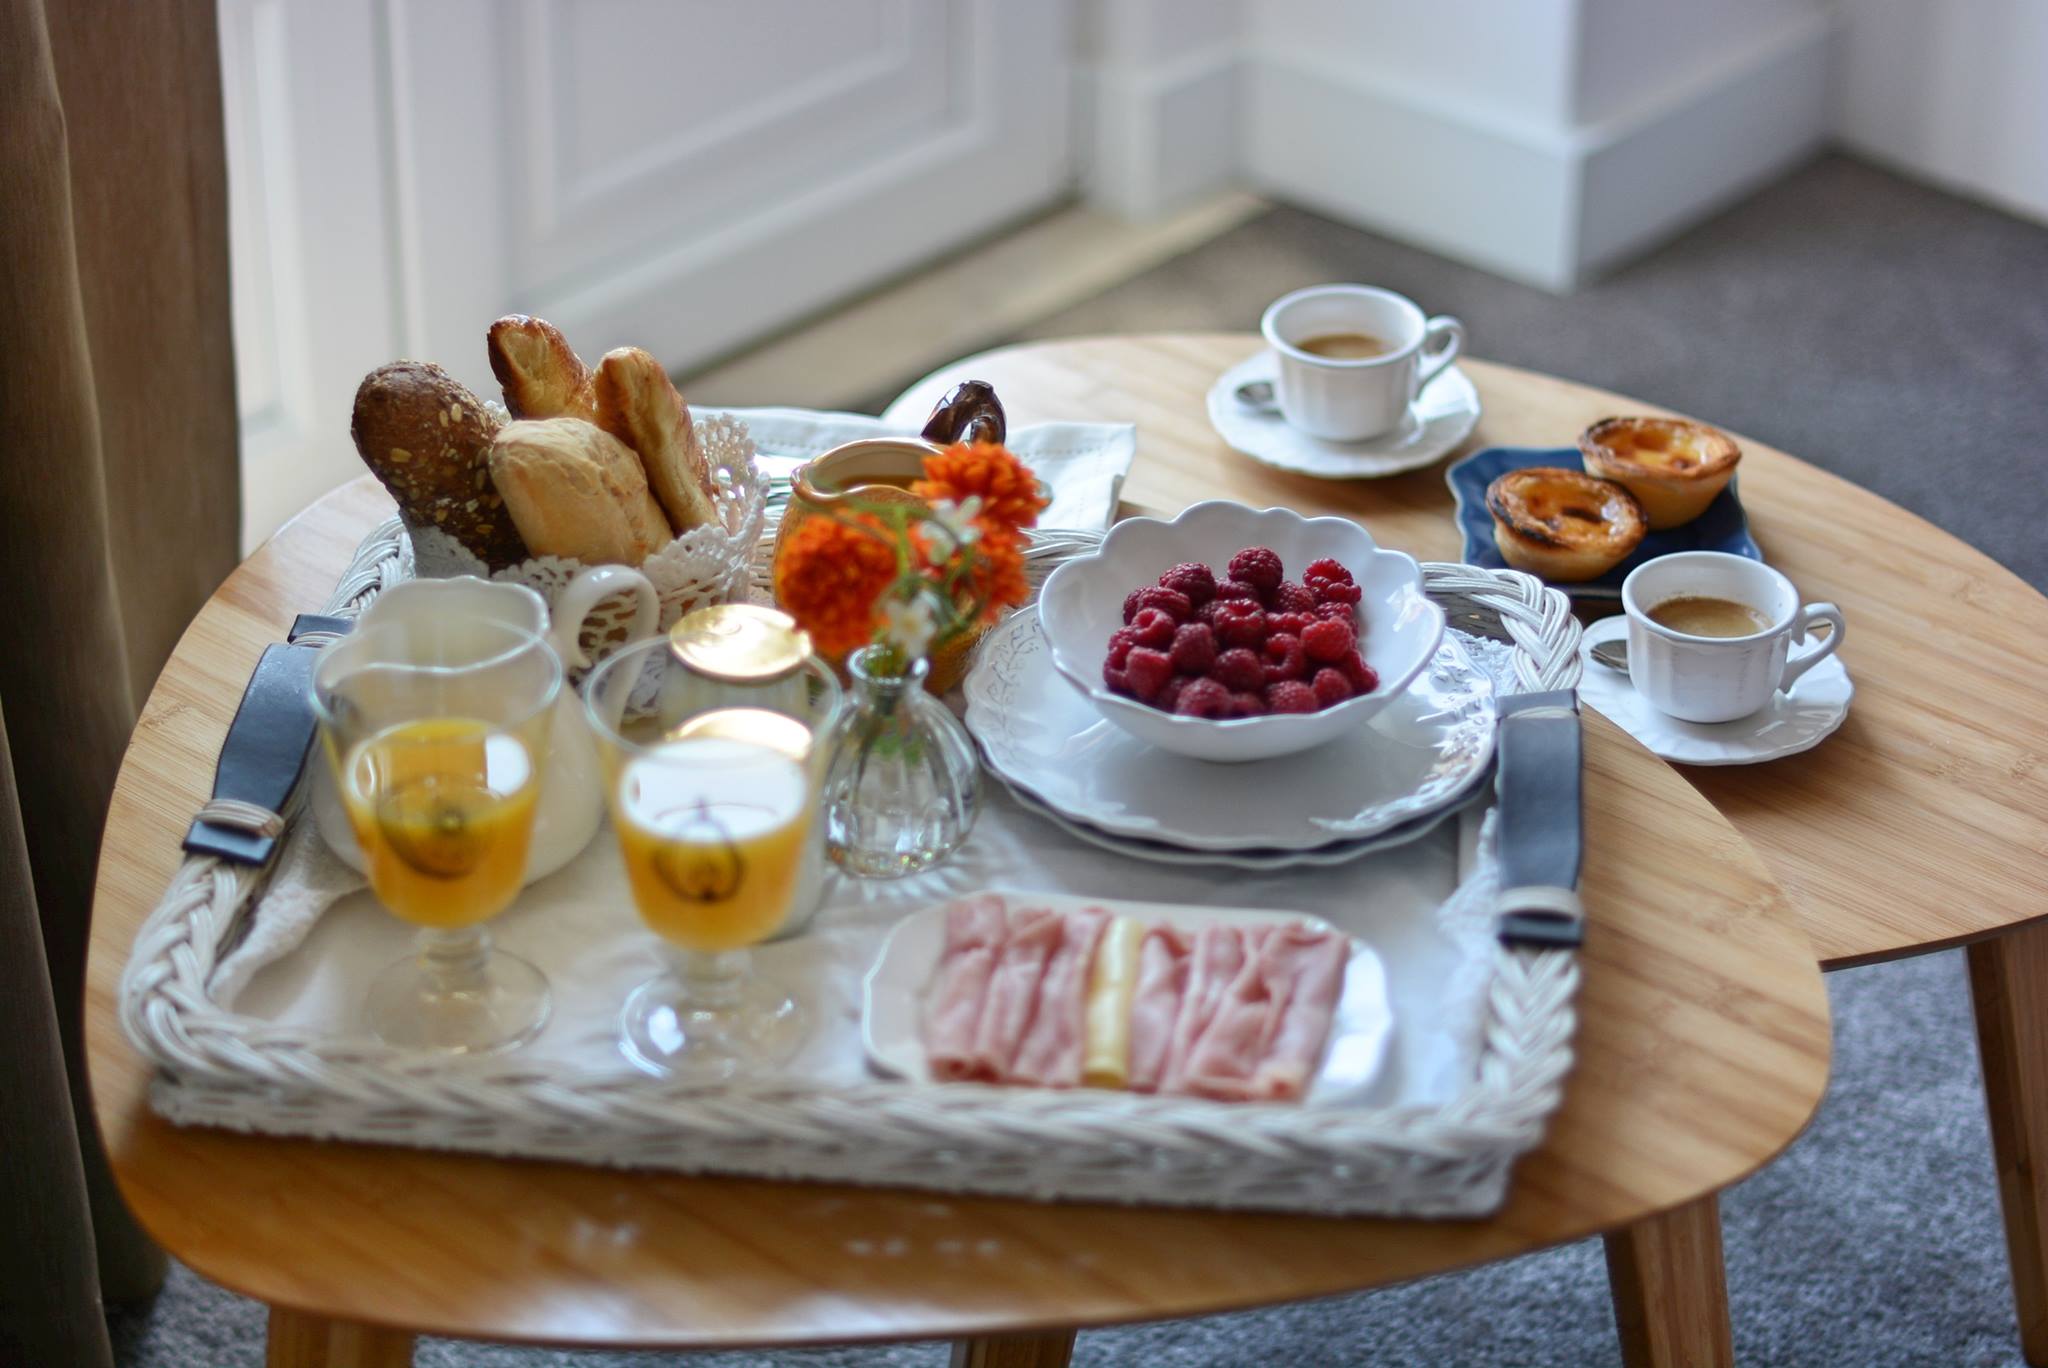 Augusta Boutique House is one of the best boutique hotels in Lisbon and offers in room breakfasts